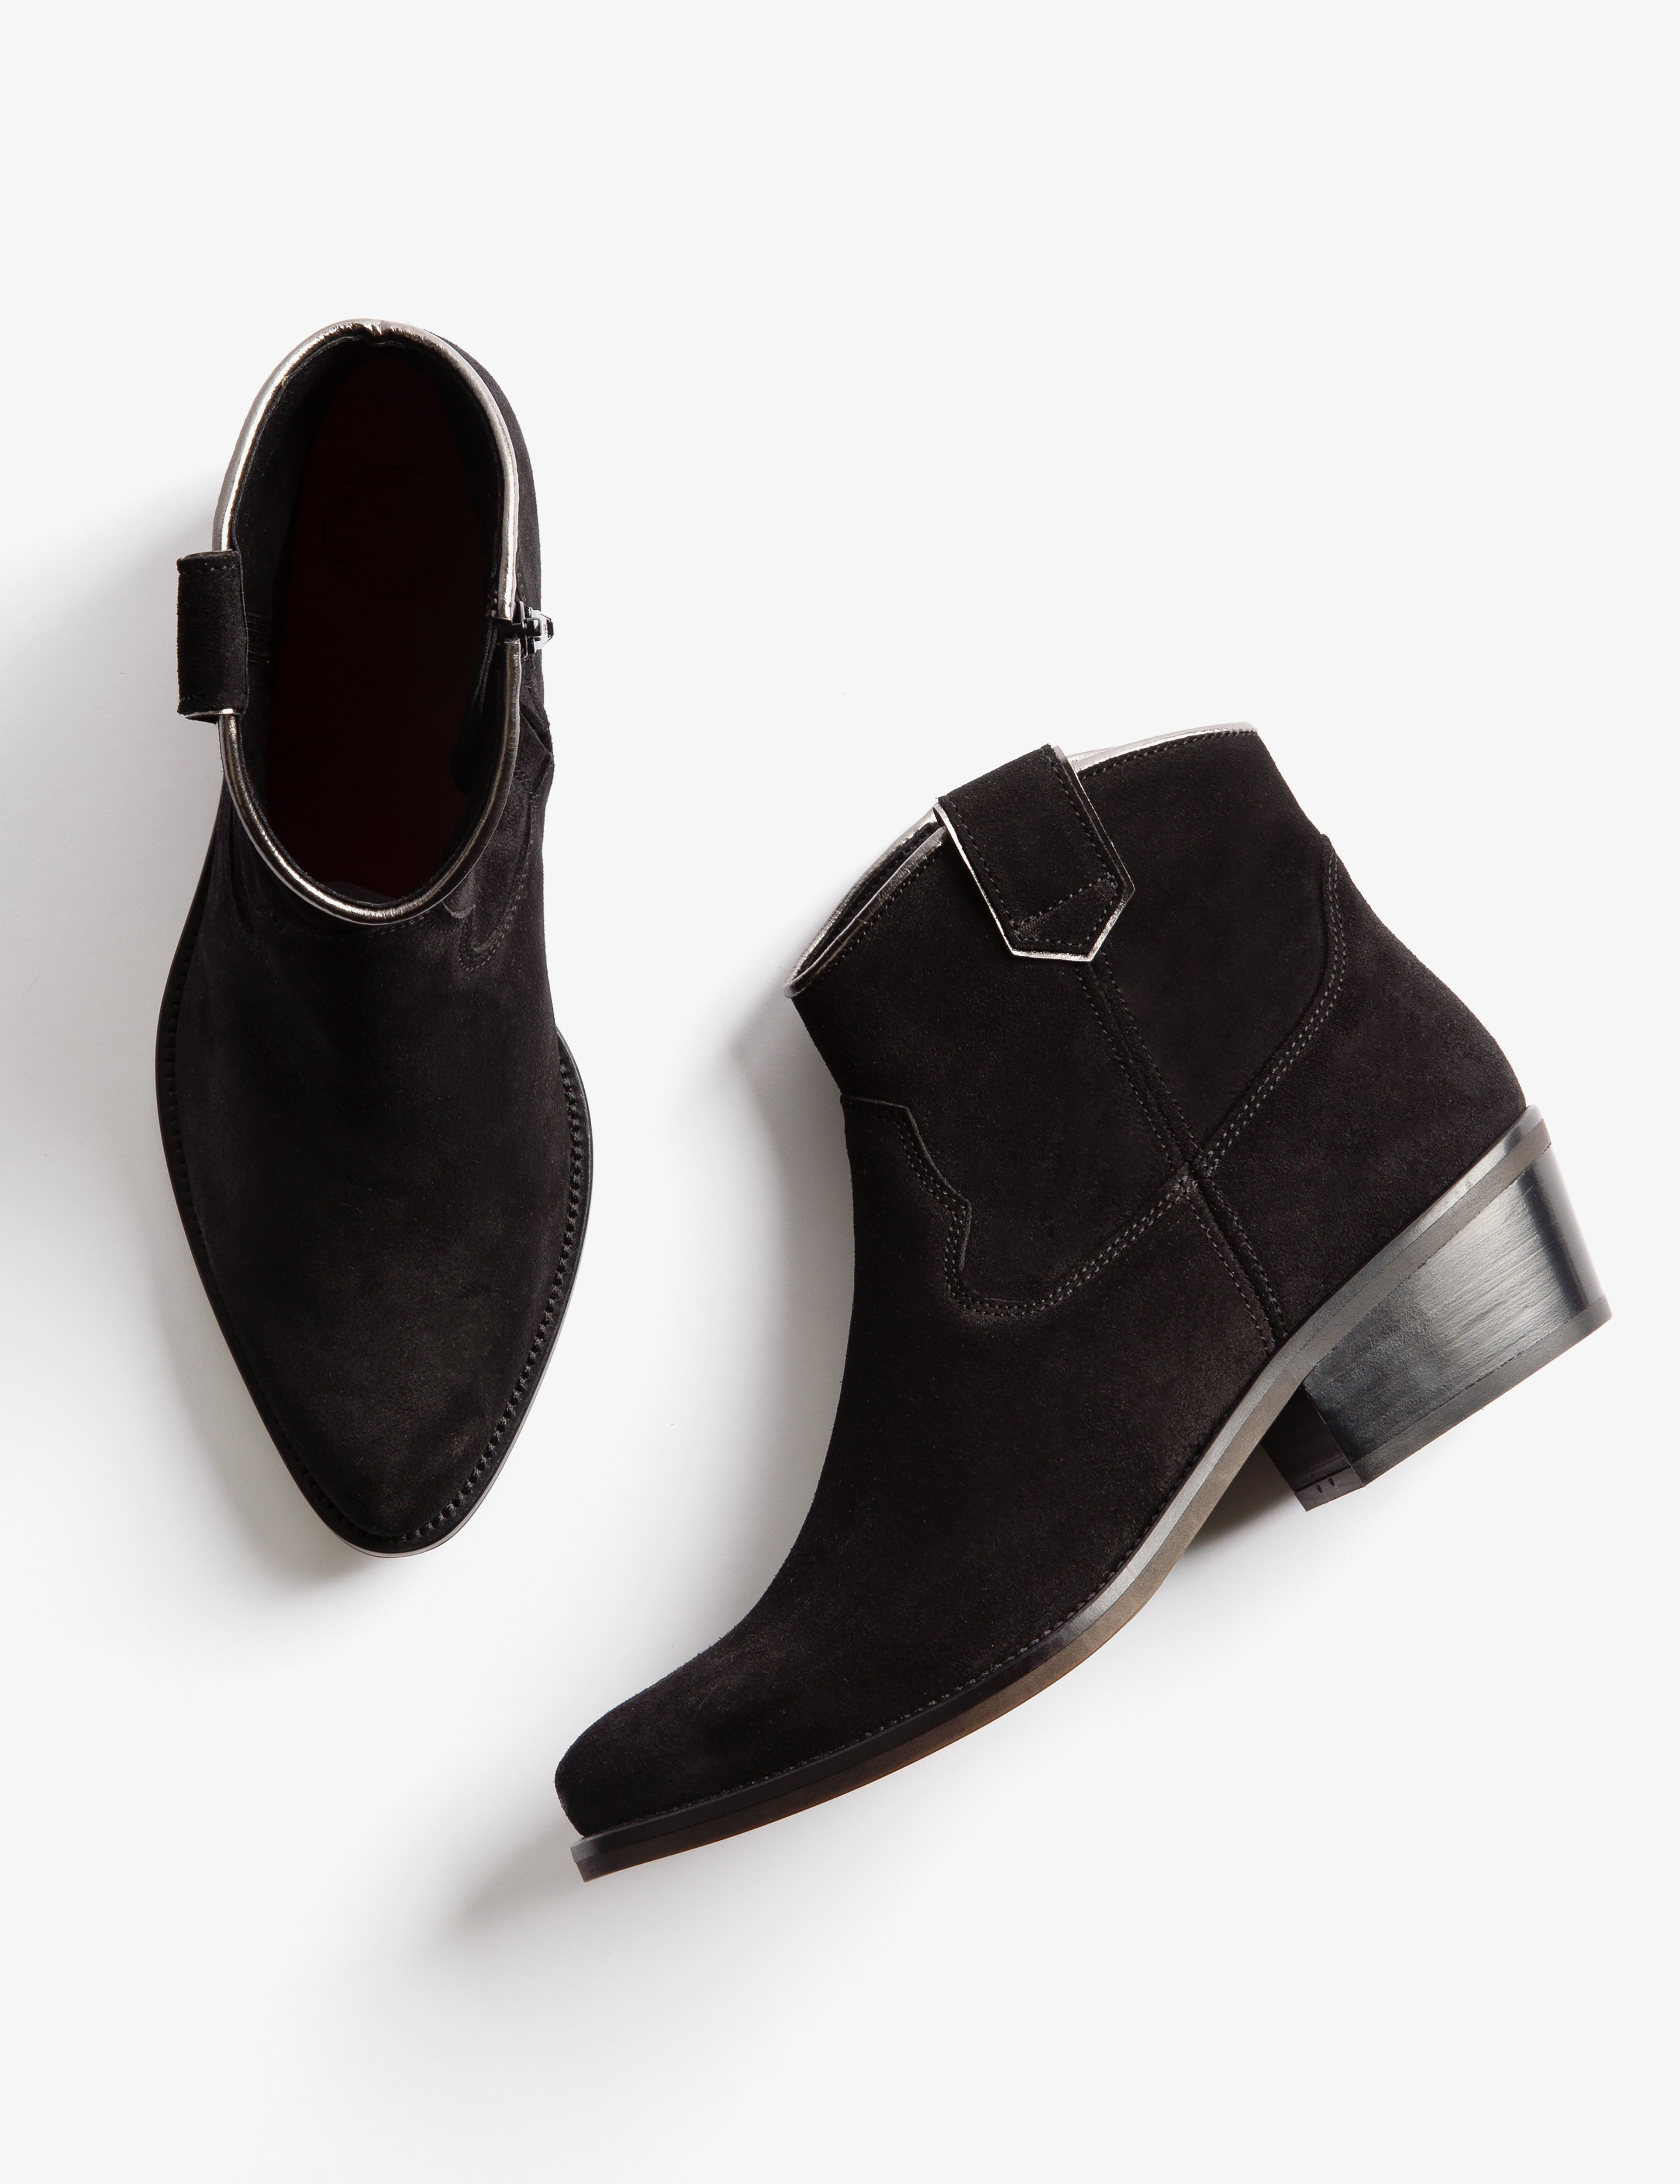 Cassidy Suede Ankle Boots in Black